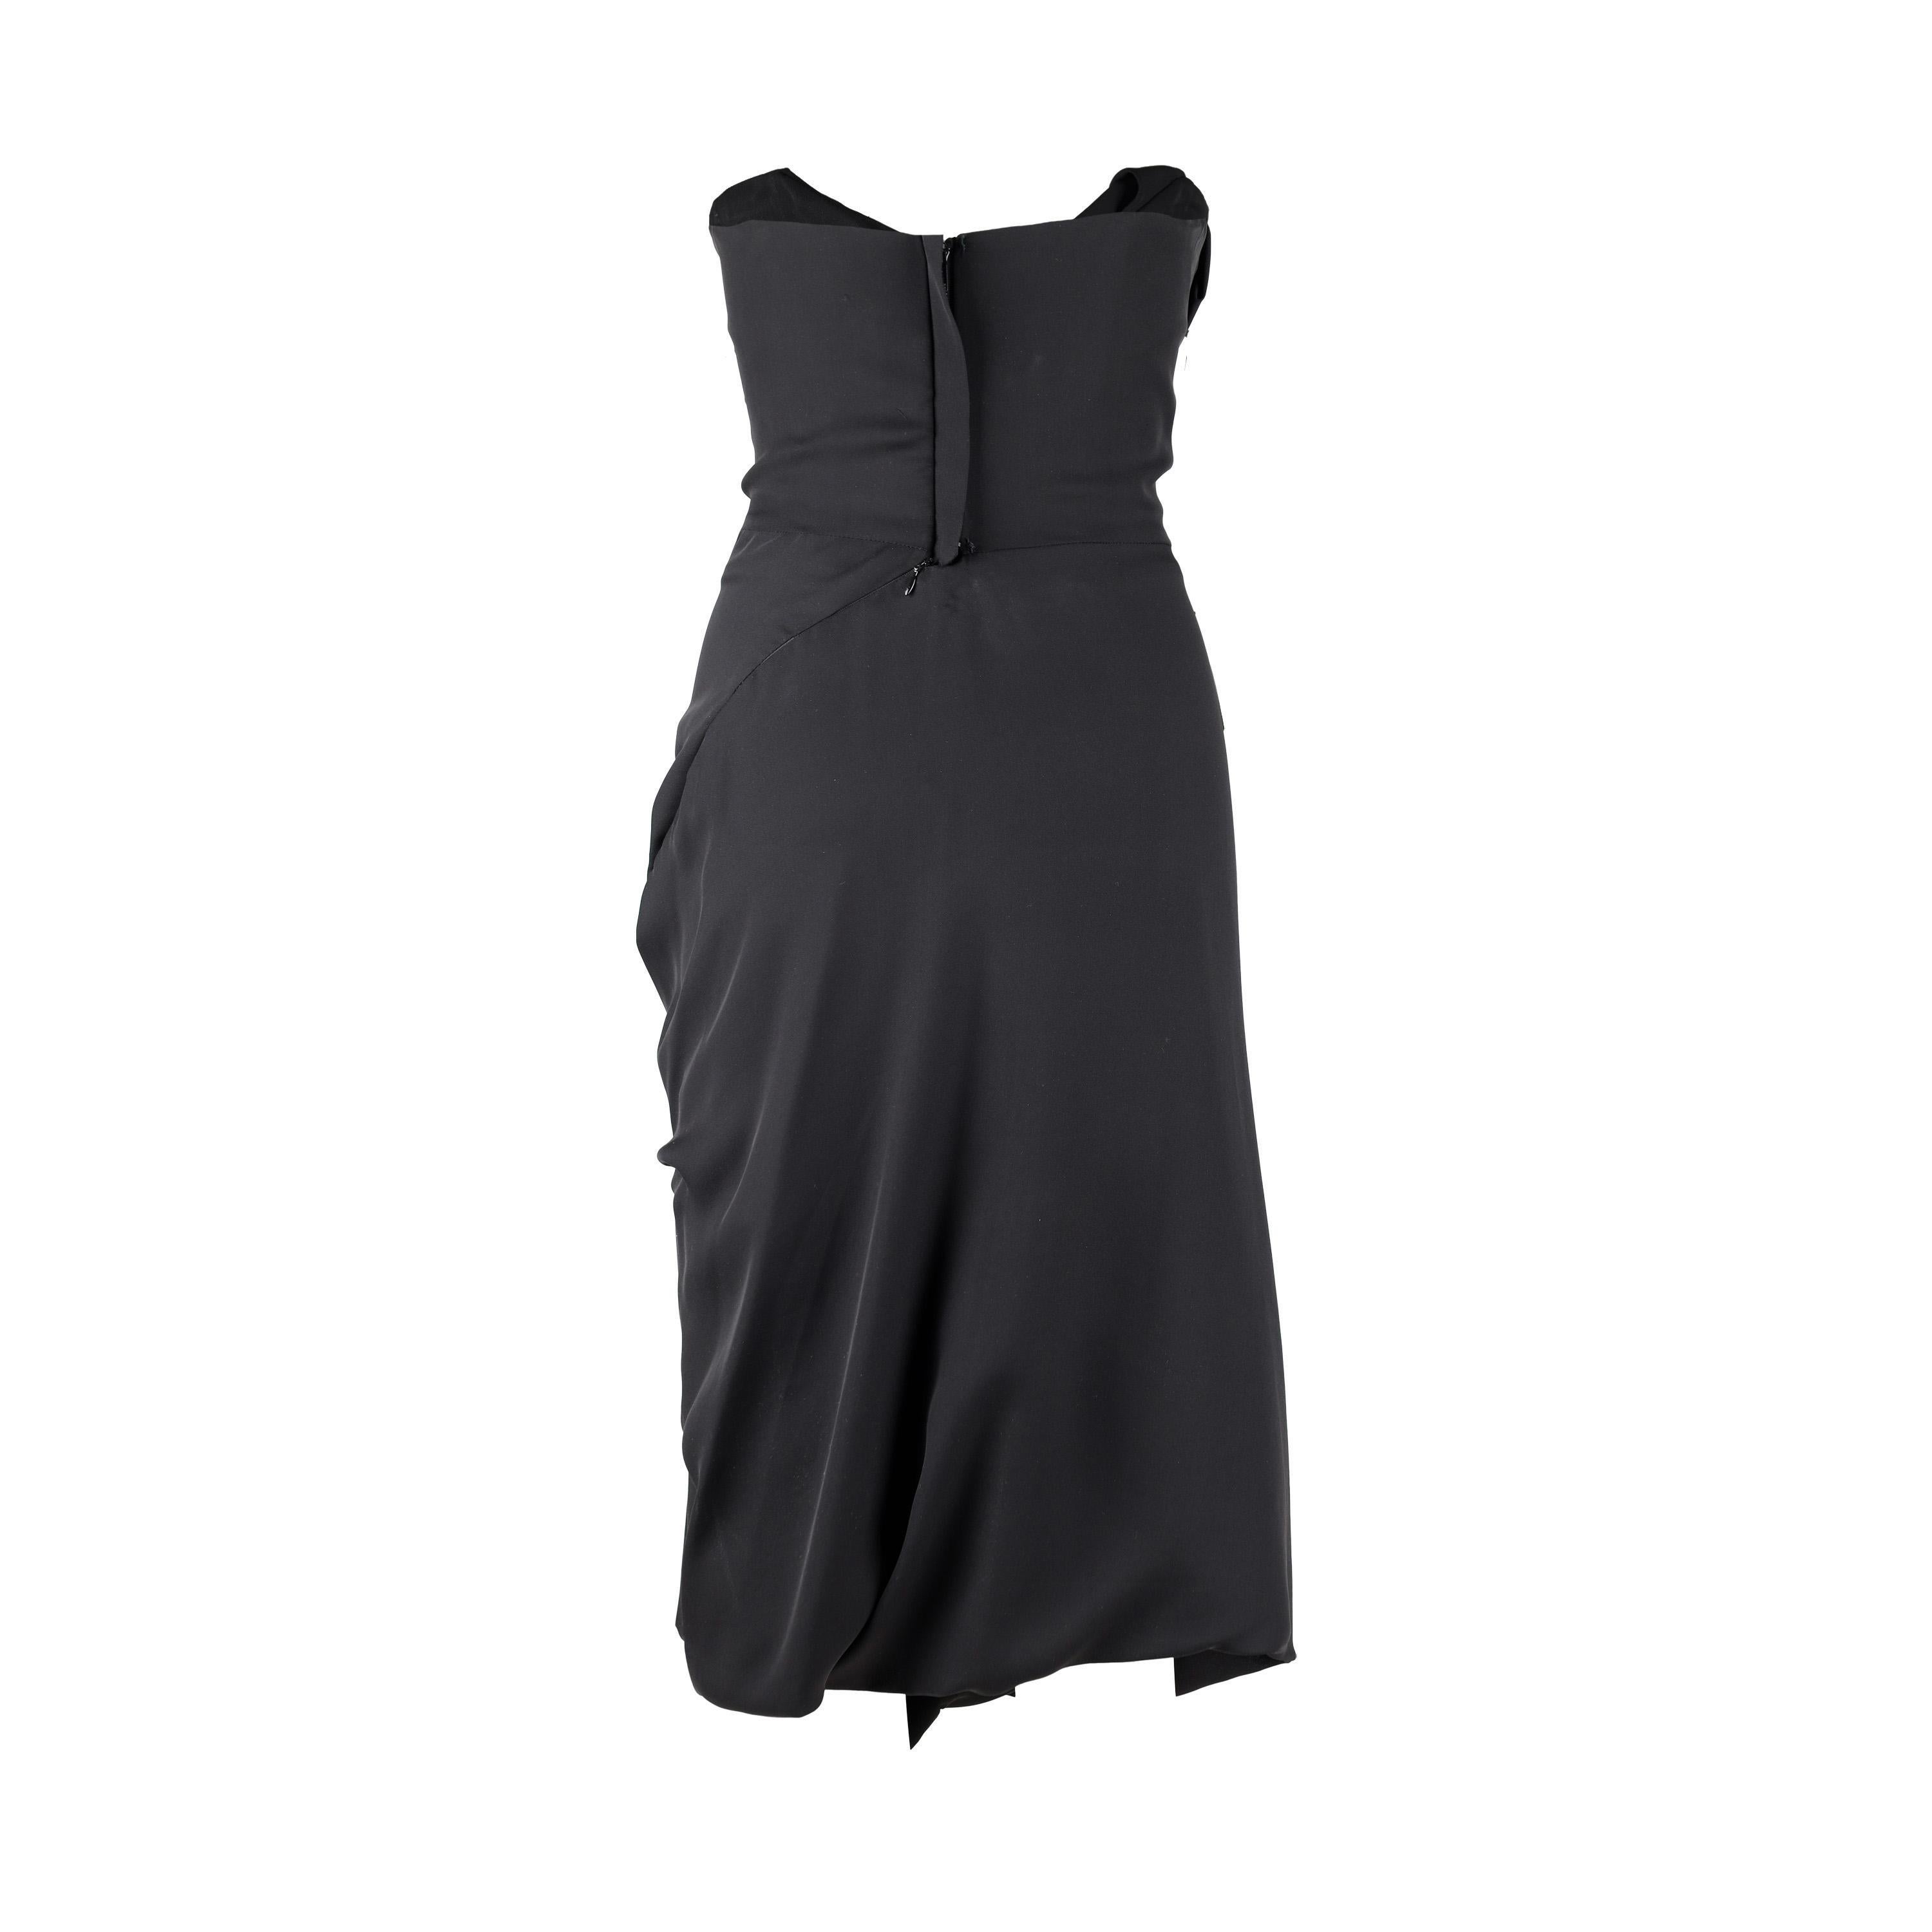 Vivienne Westwood Corset Dress In Excellent Condition For Sale In Milano, IT